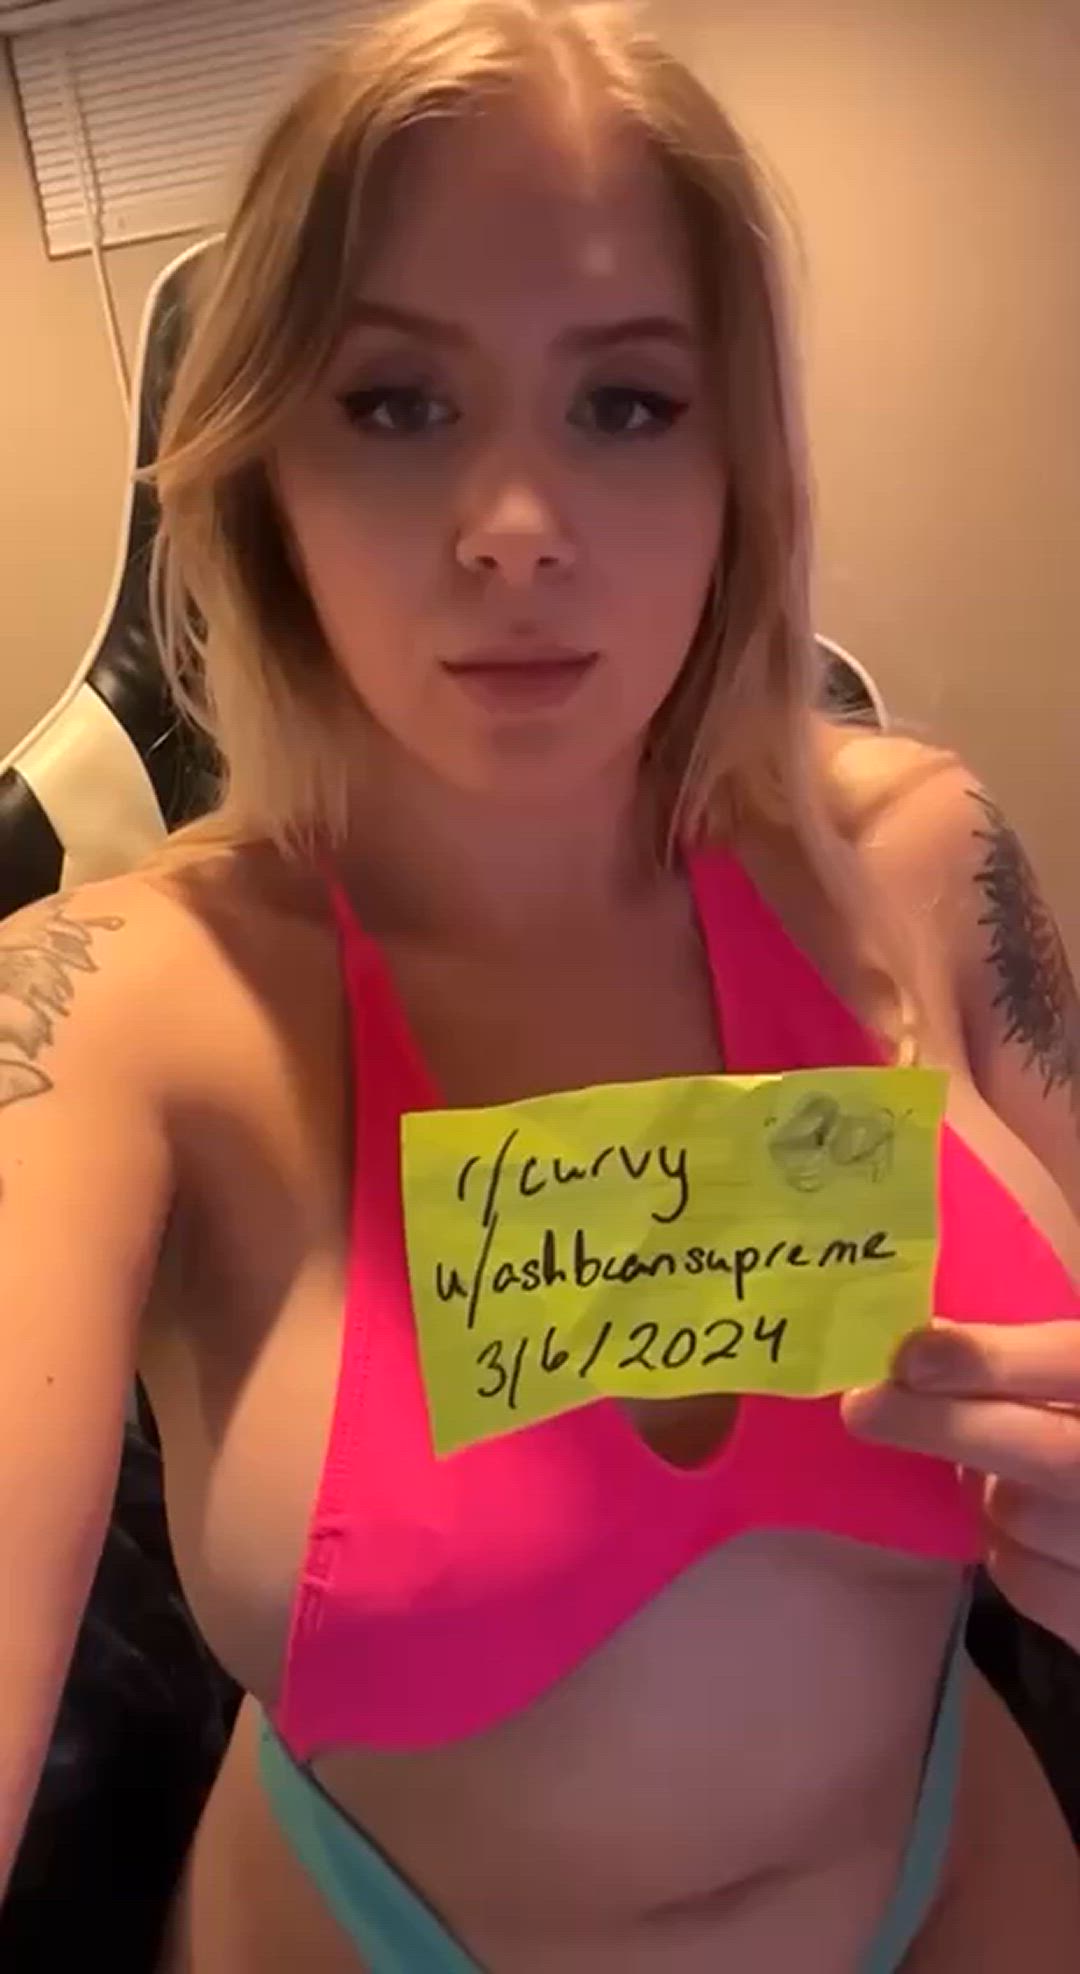 Ass porn video with onlyfans model ashbeanxo <strong>@ashbeansupreme</strong>